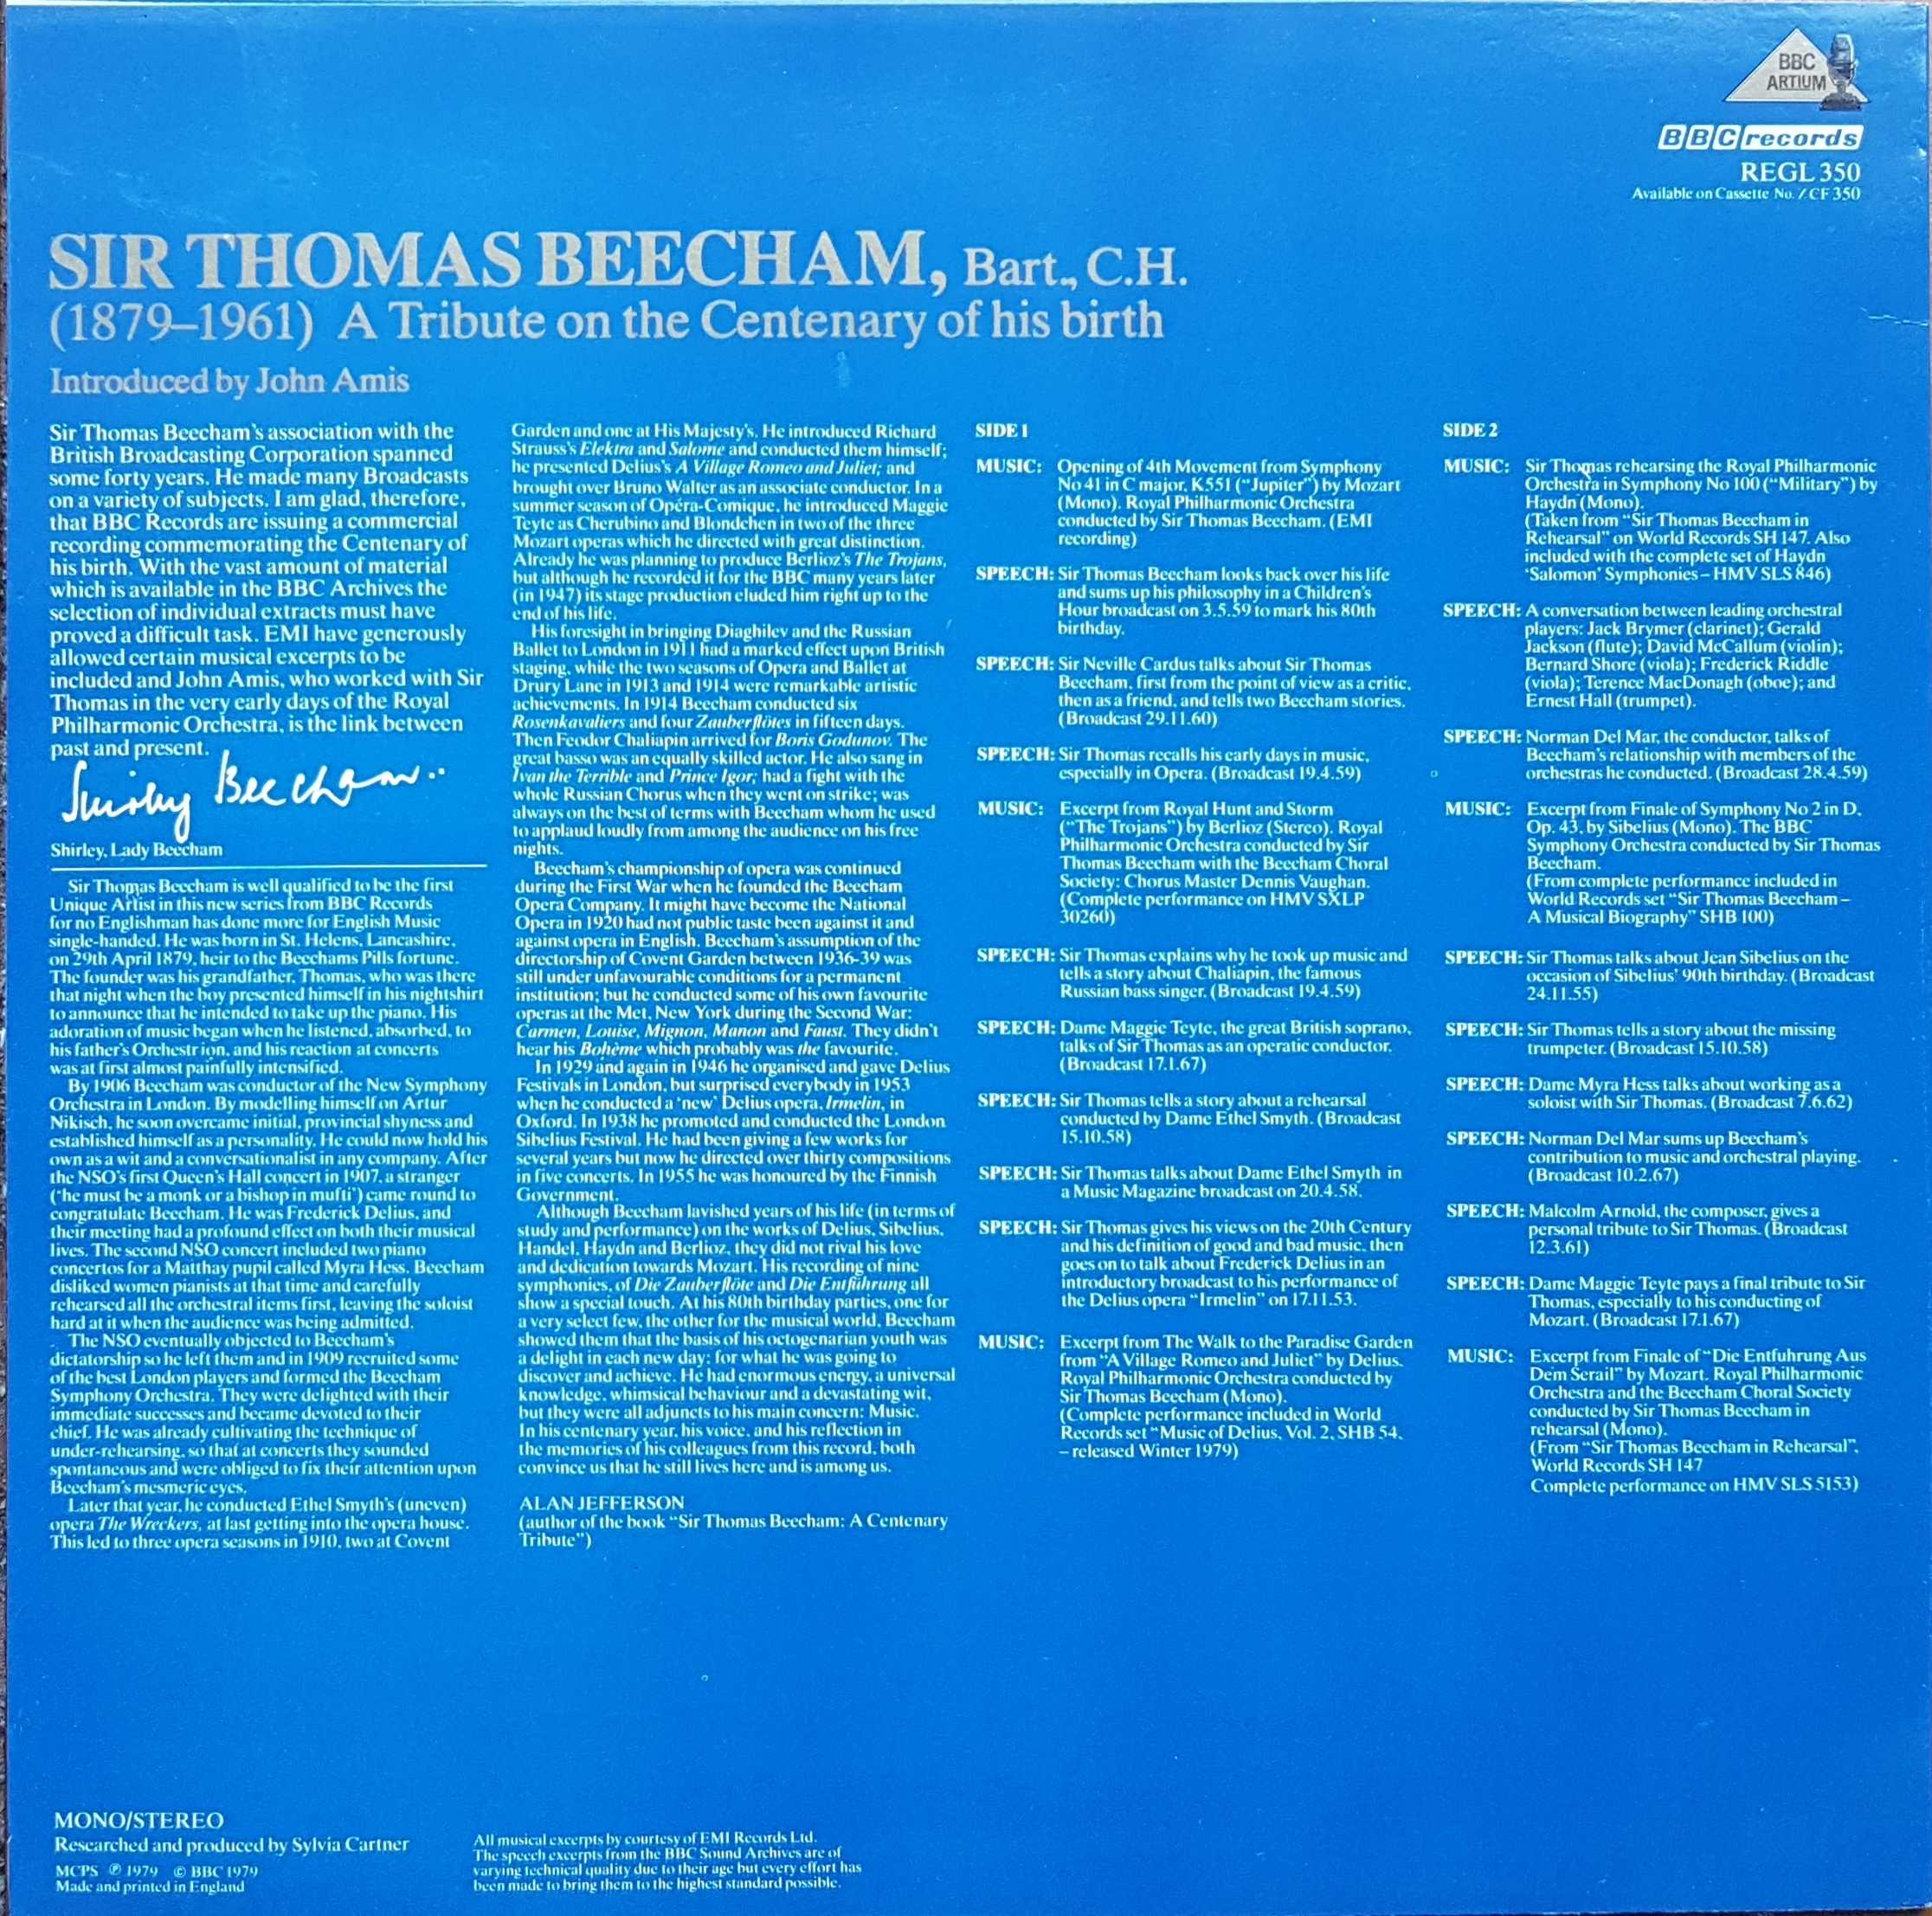 Picture of REGL 350 Sir Thomas Beecham by artist Sir Thomas Beecham from the BBC records and Tapes library